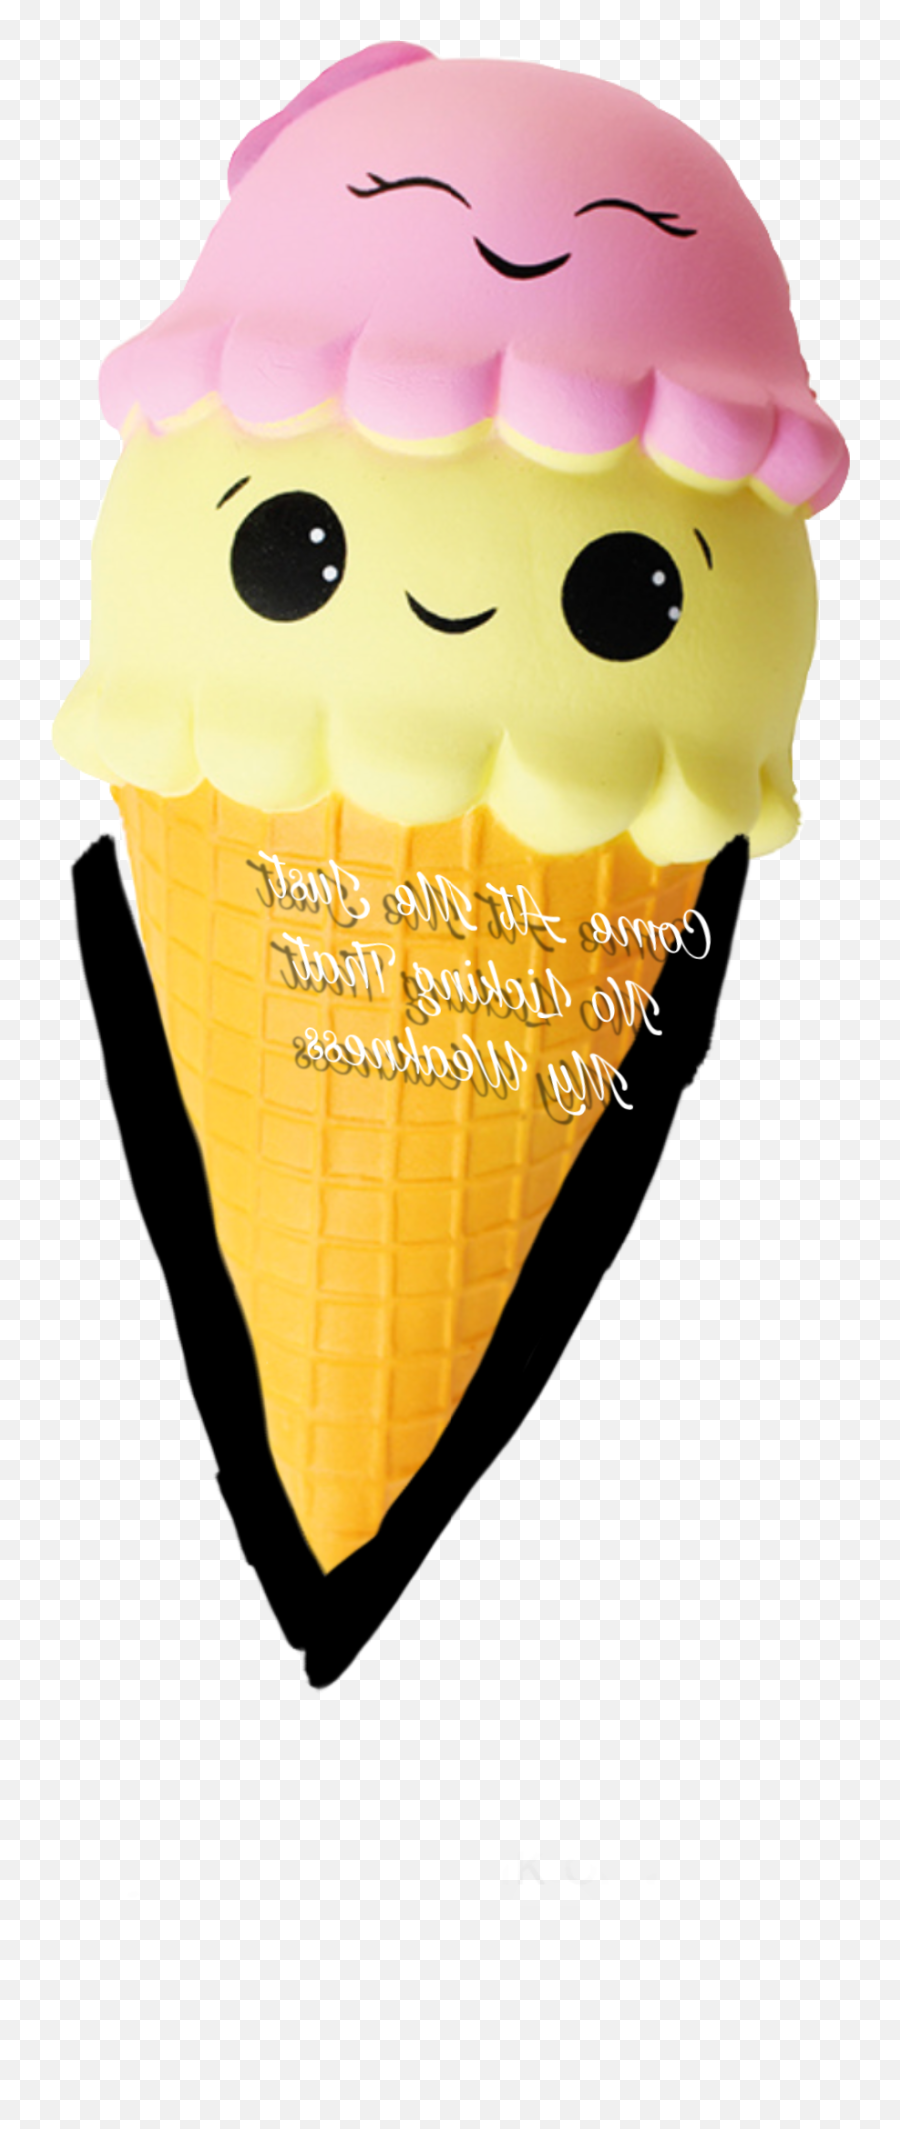 The Most Edited Licking Picsart - Cone Emoji,Emoticon Eating And Licking Lips